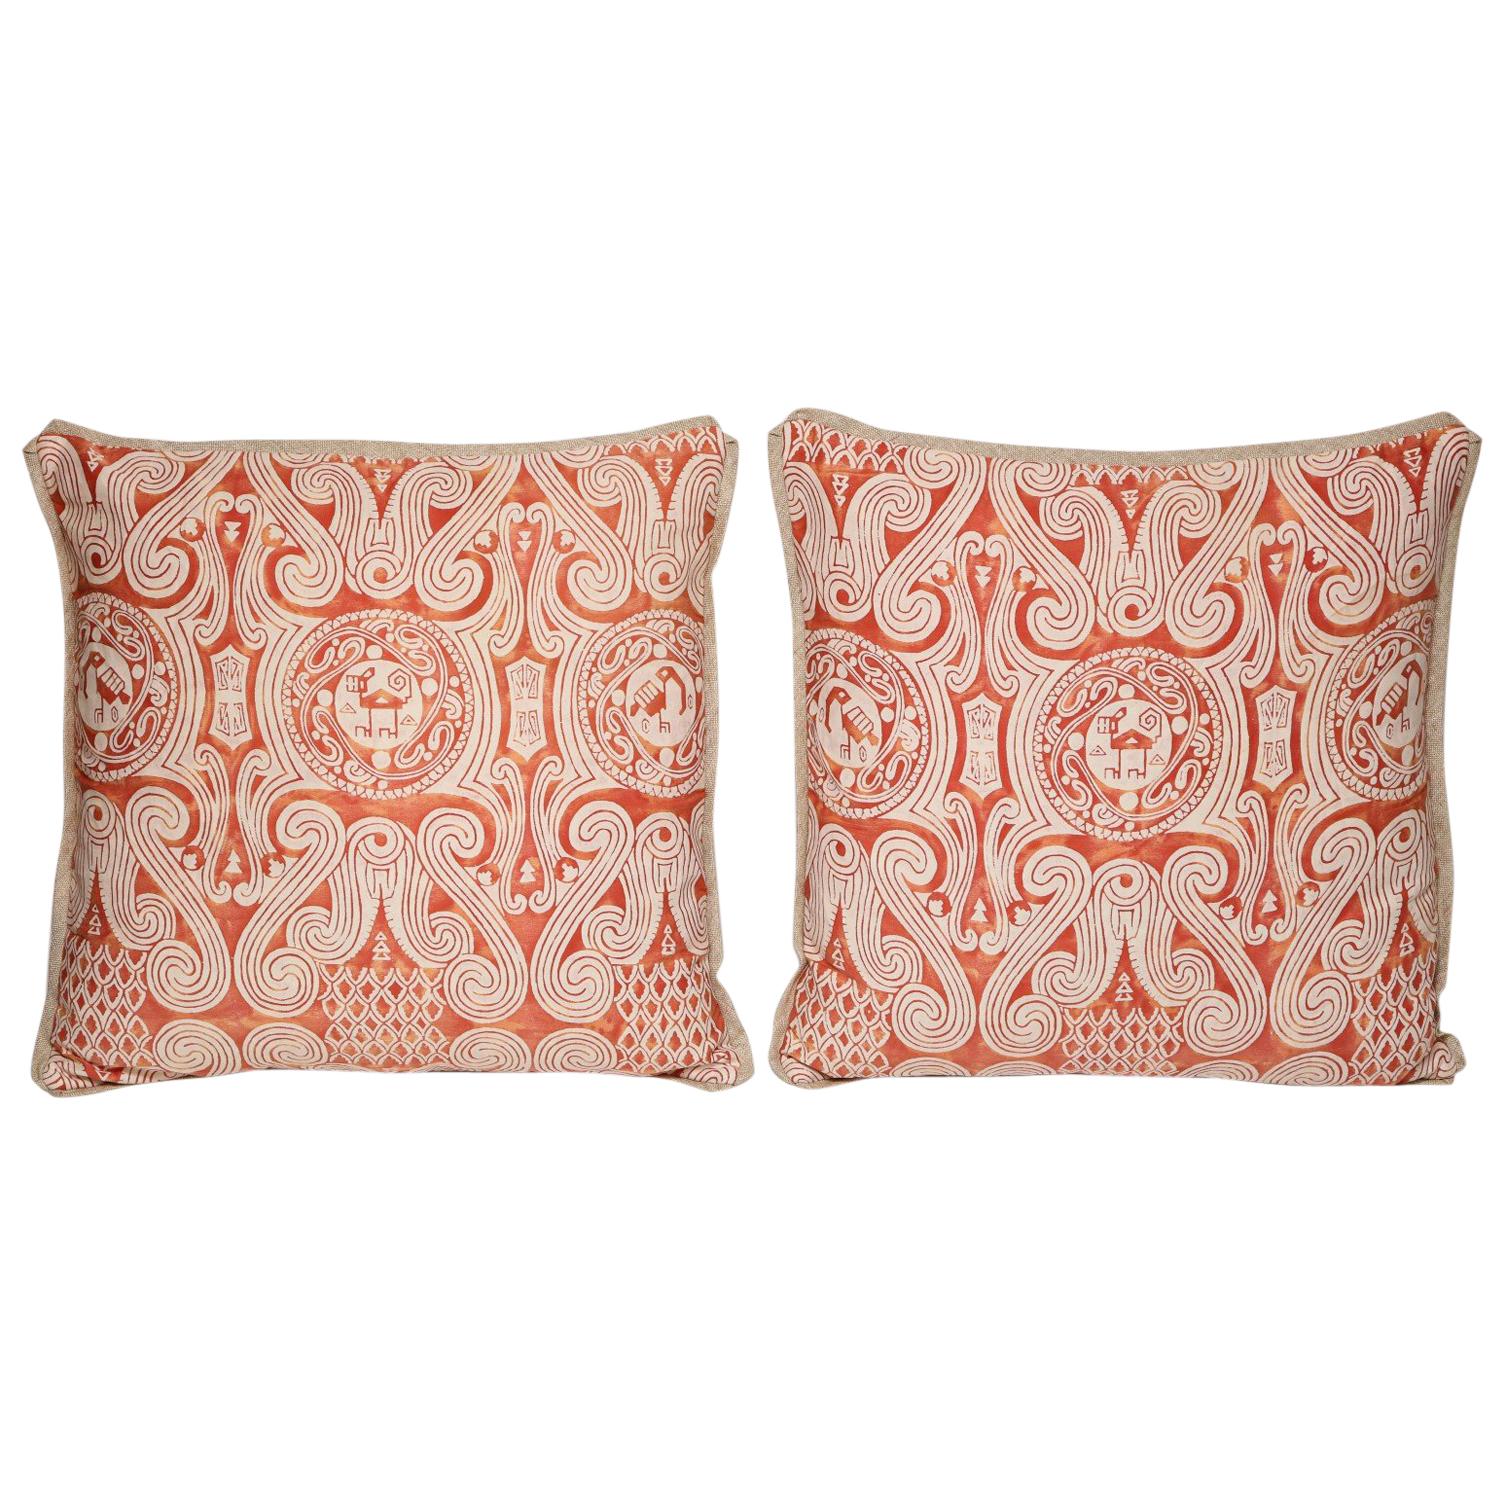 Pair of Fortuny Fabric Cushions in the Peruviano Incan Pattern